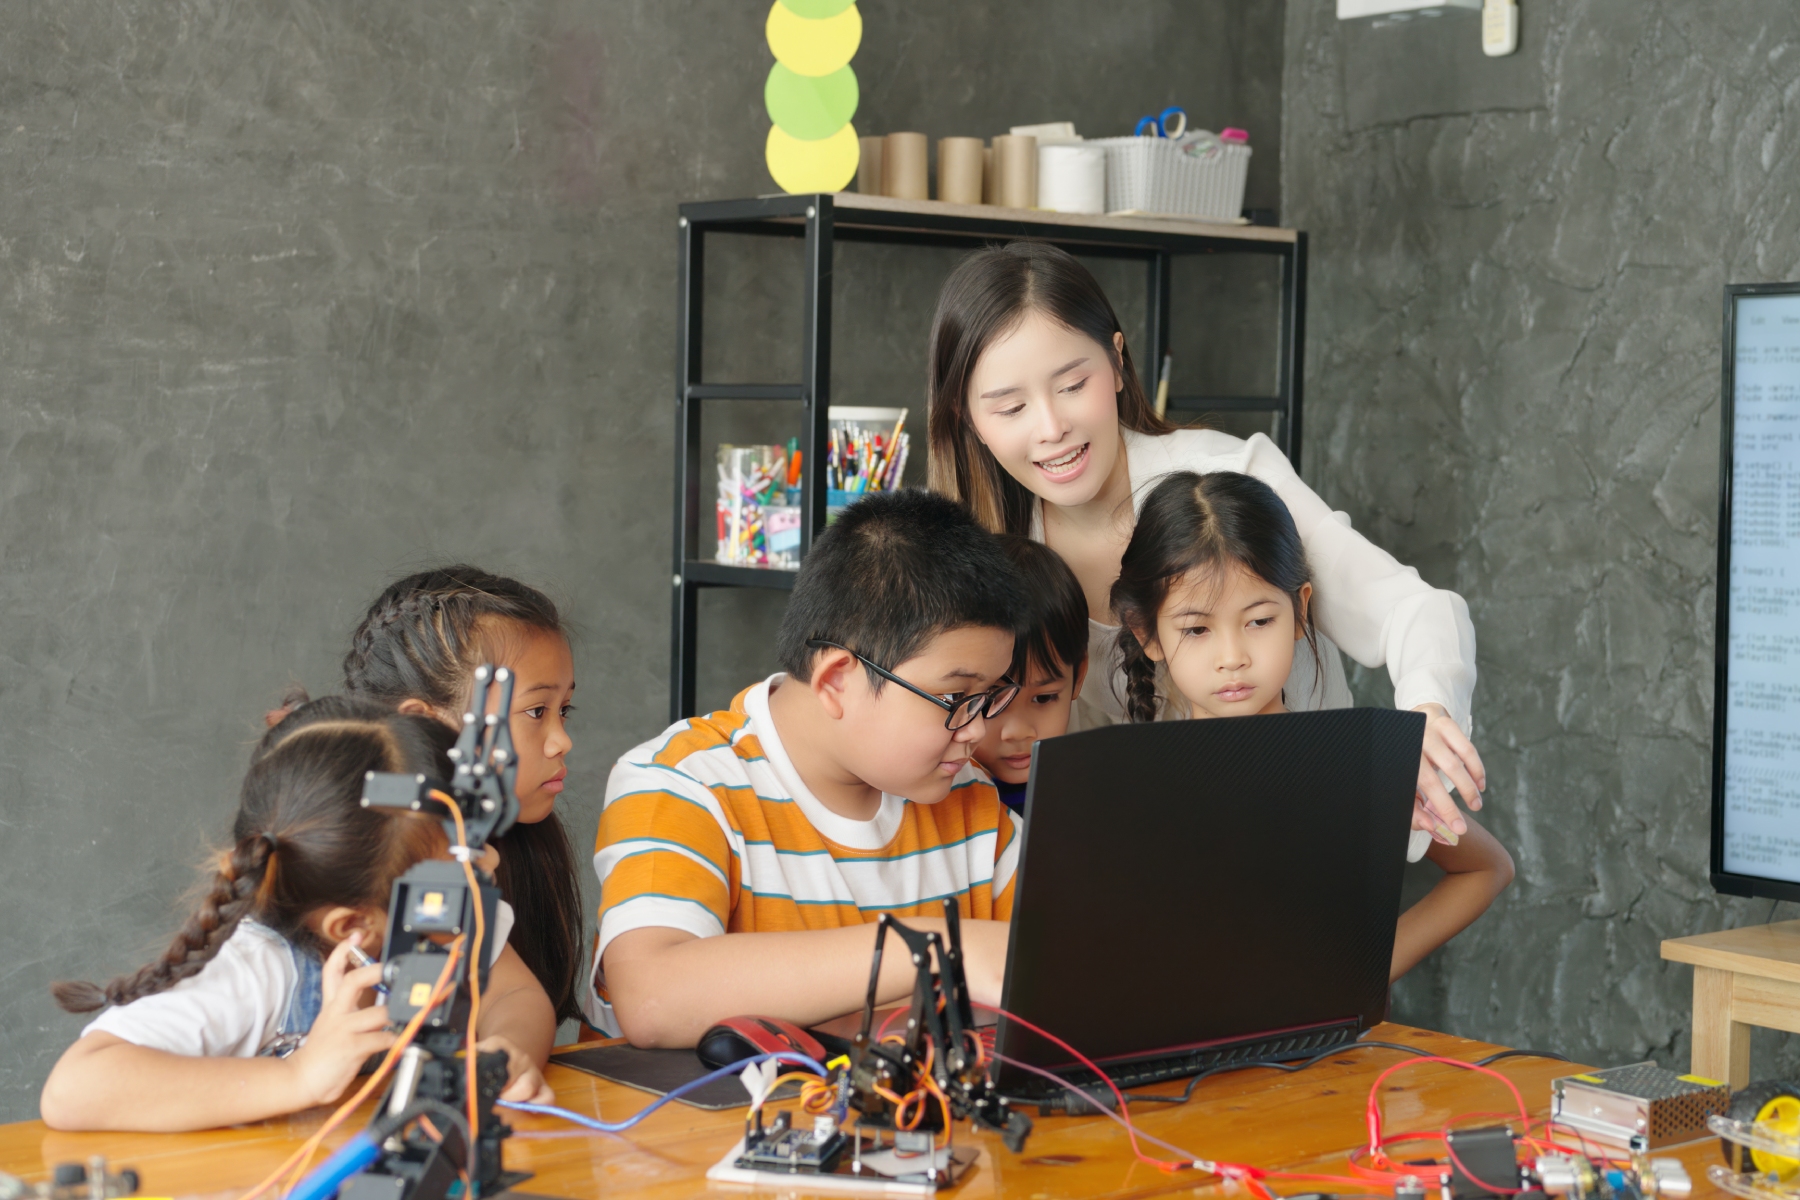 Teacher and students gather around a computer and a robot arm on a desk in a classroom